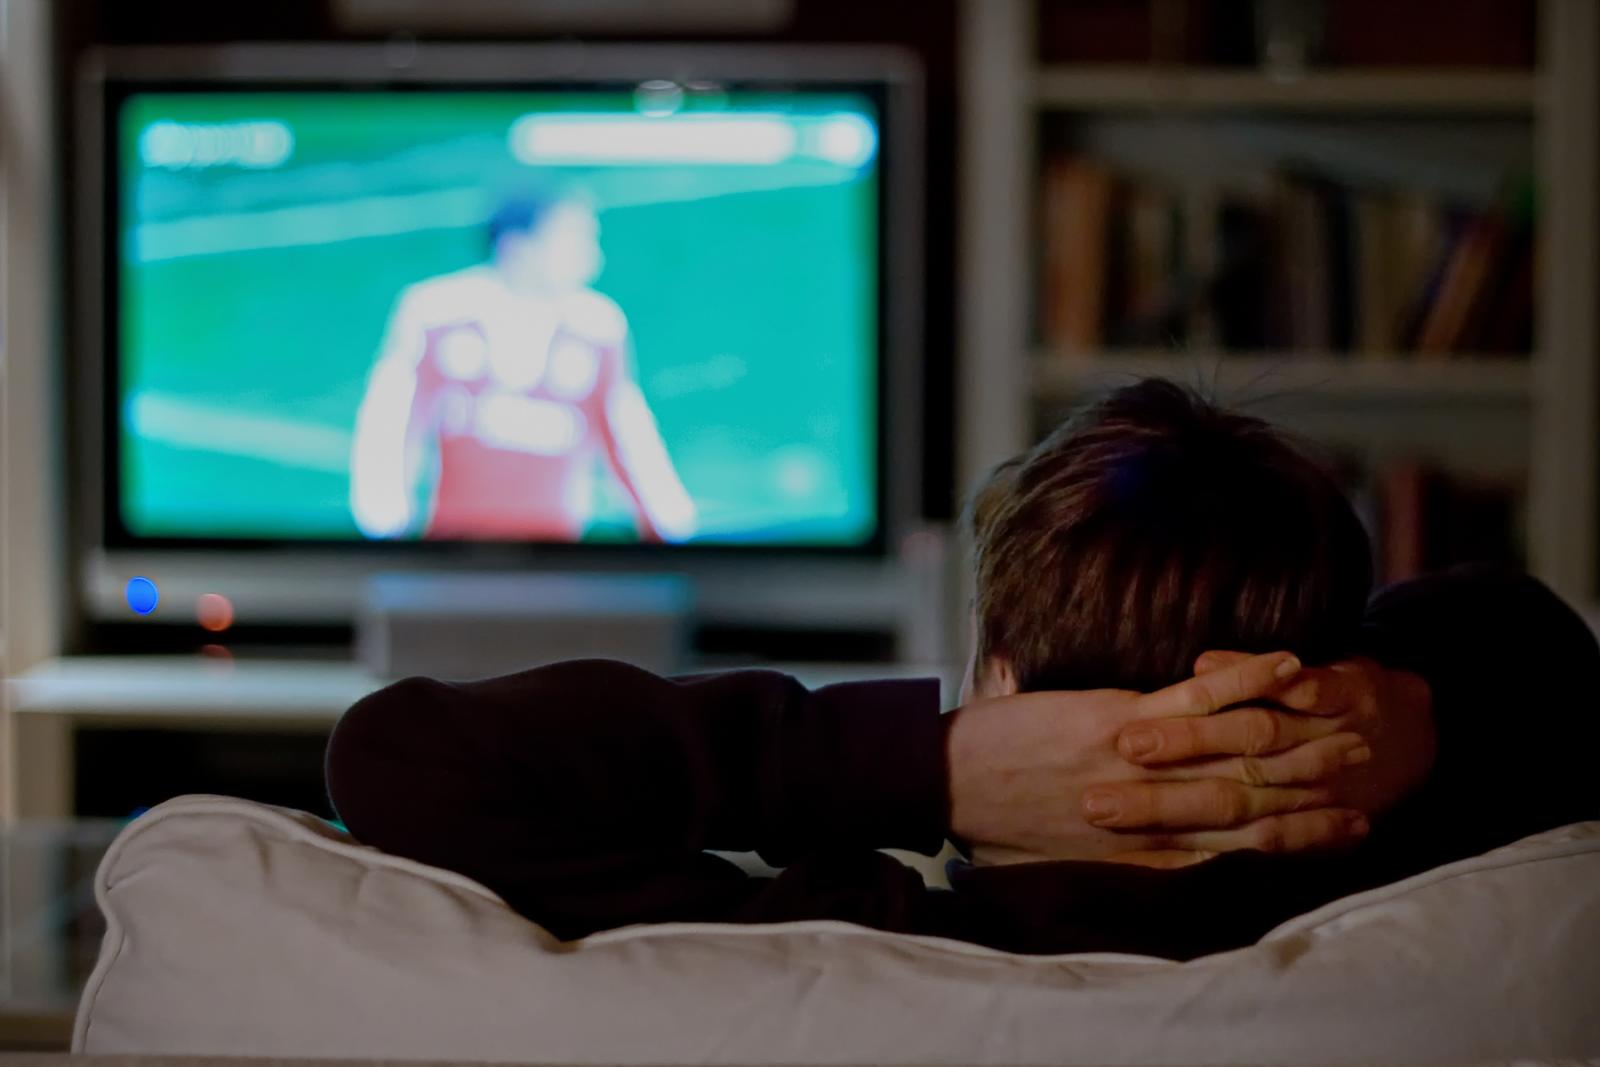 A person watching sport on their TV